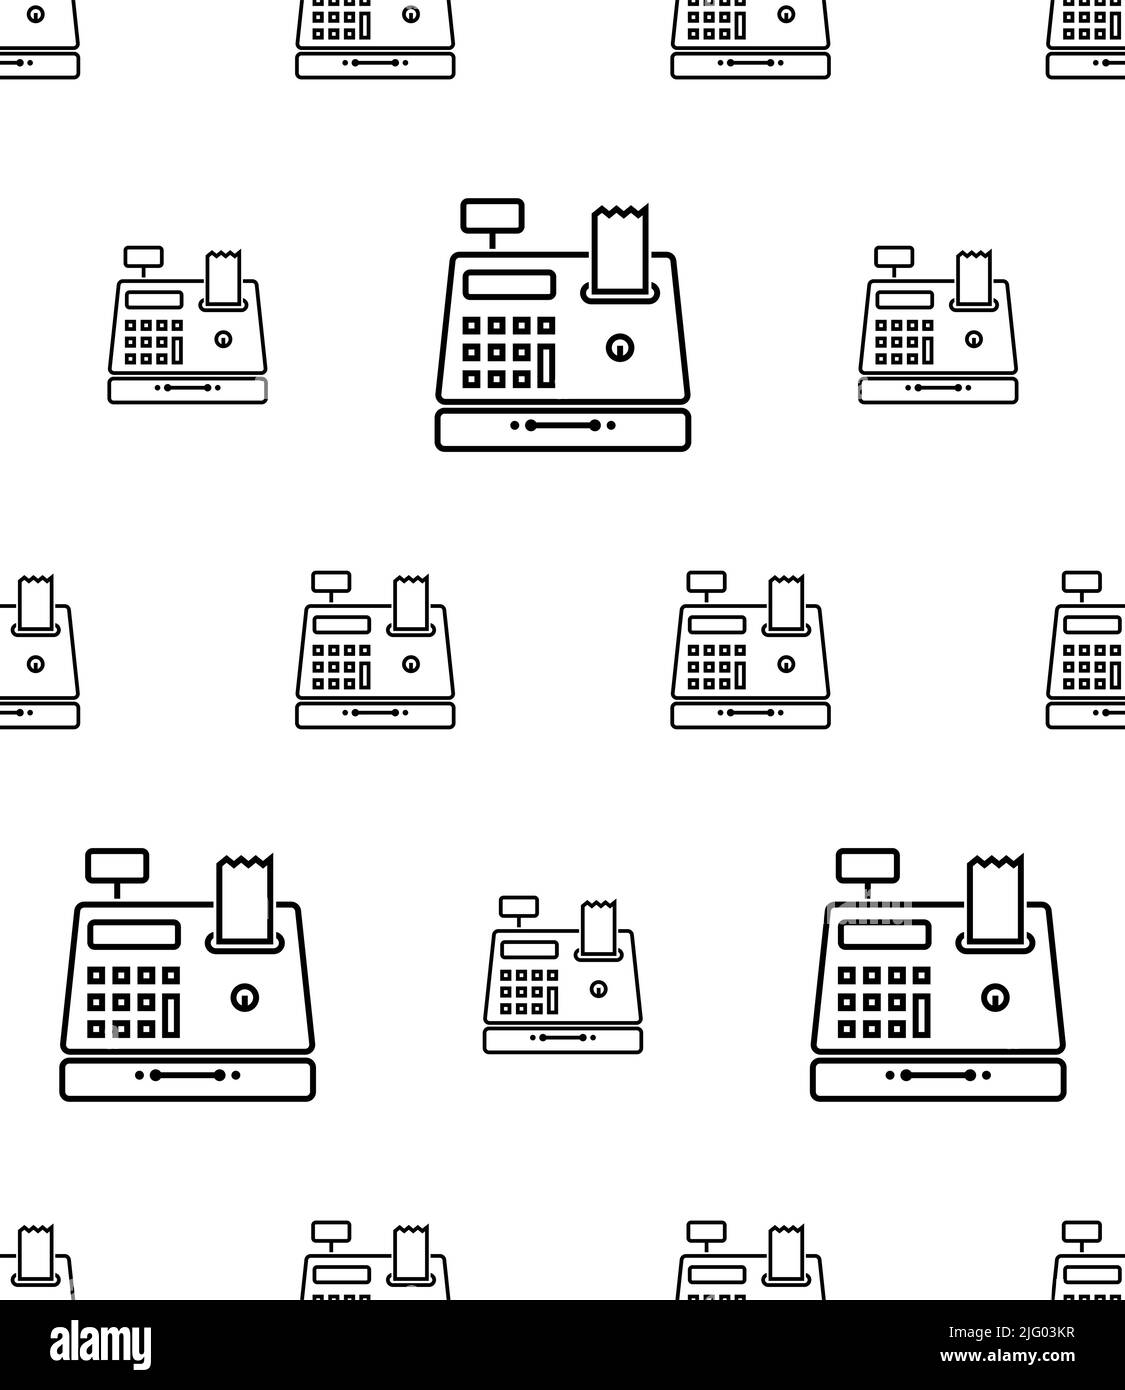 Cash Register Icon Seamless Pattern, Point Of Sale Electronic Device For Registering And Calculating Transactions Vector Art Illustration Stock Vector